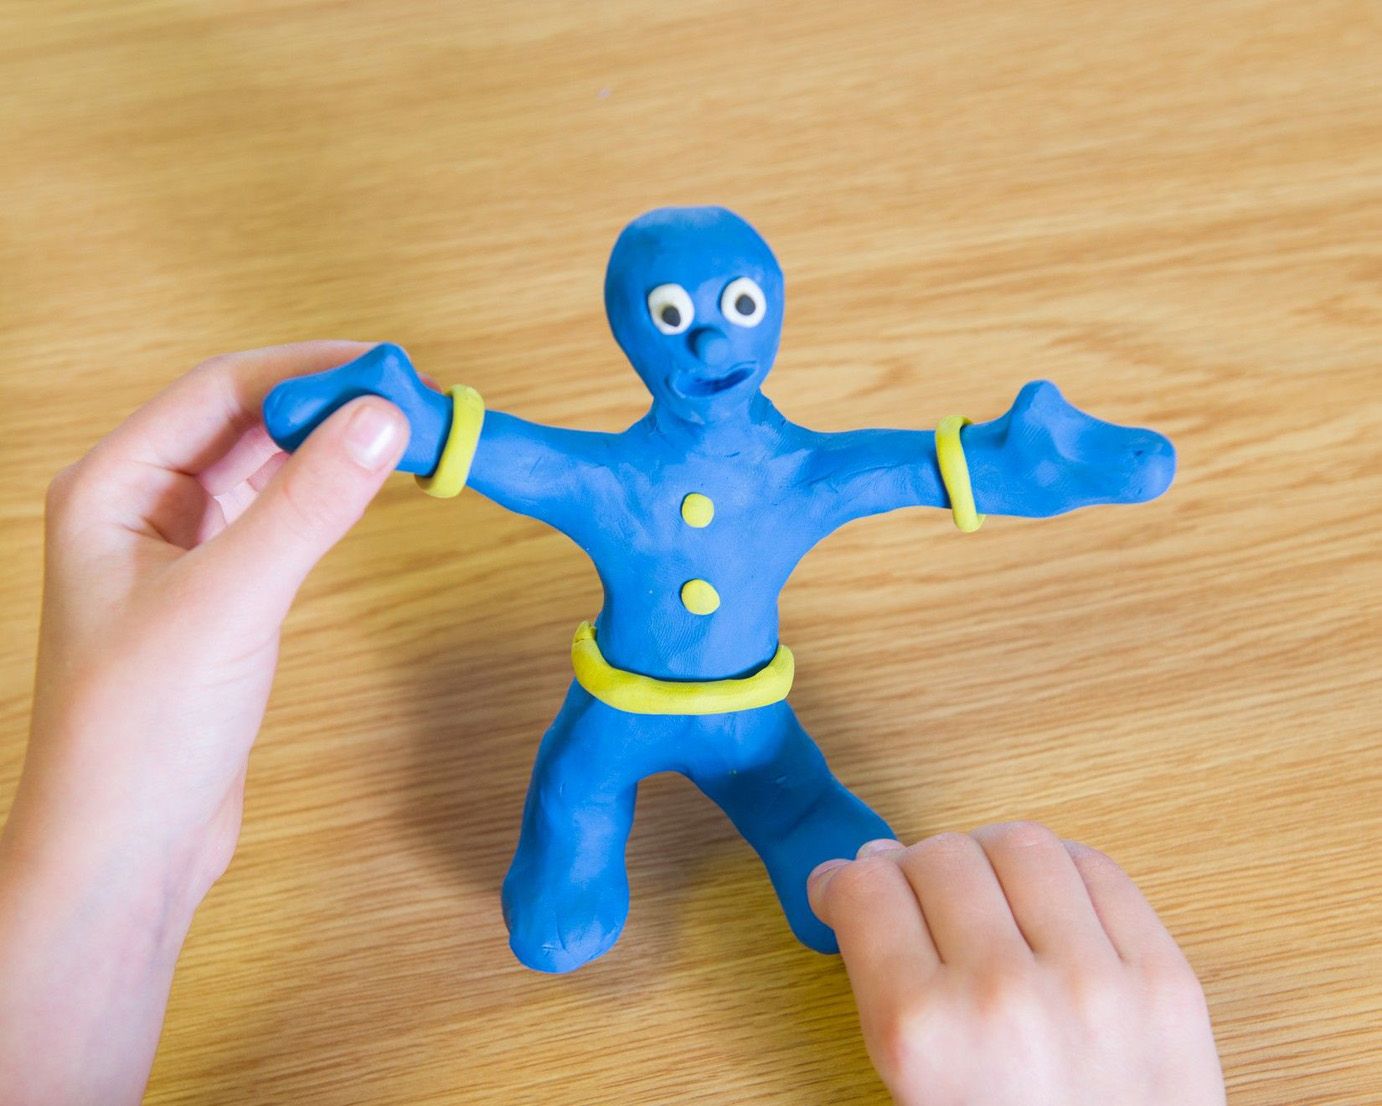 Blue clay man, ready for animating!